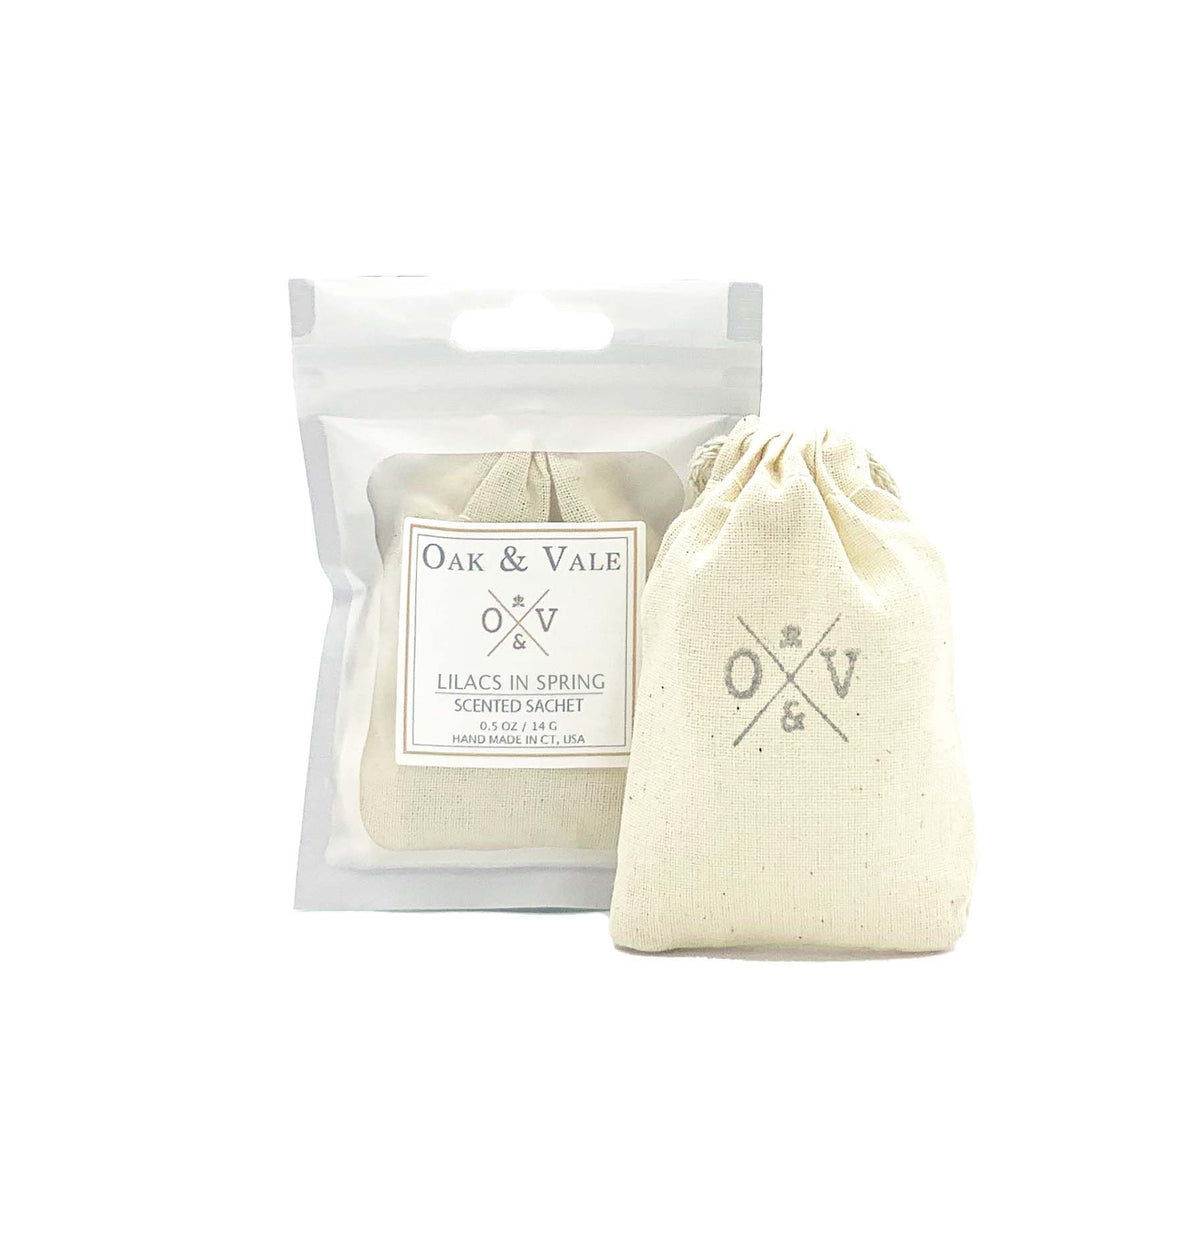 LILACS IN SPRING SCENTED SACHET